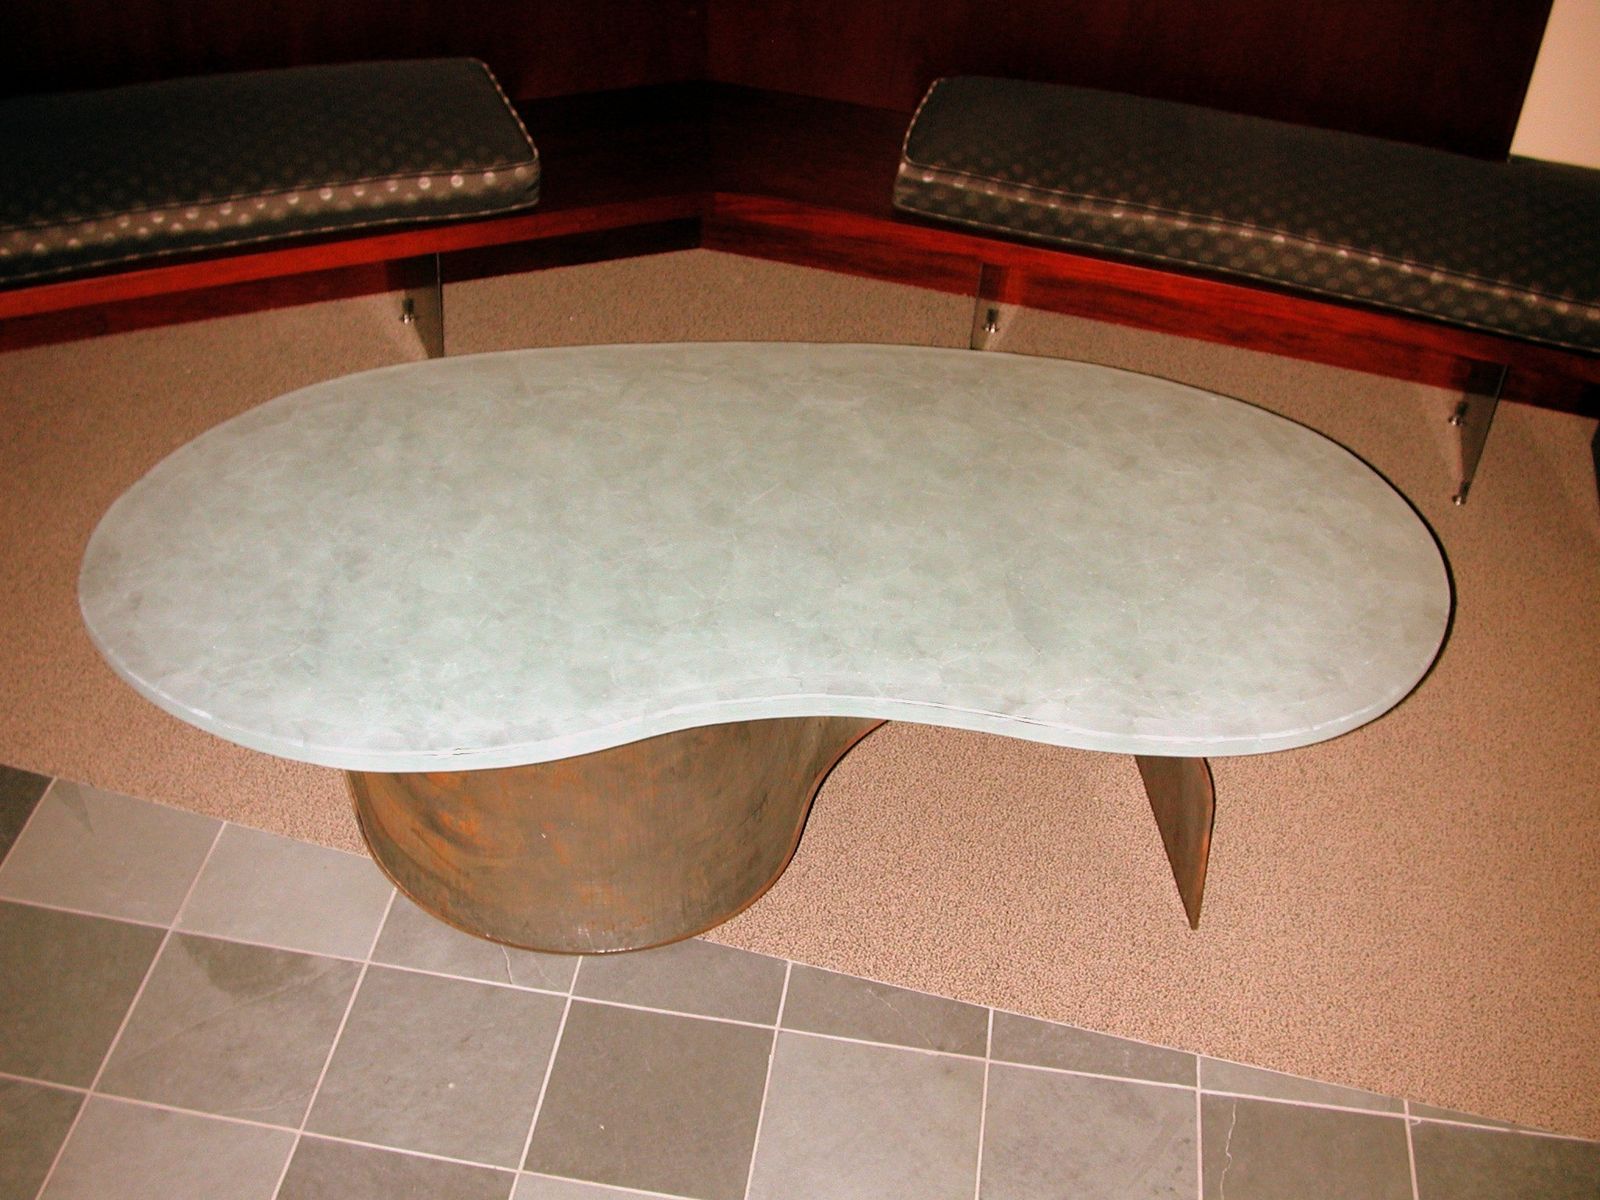 The Bean-Shaped Coffee Table: A Modern Statement for Your Living Room